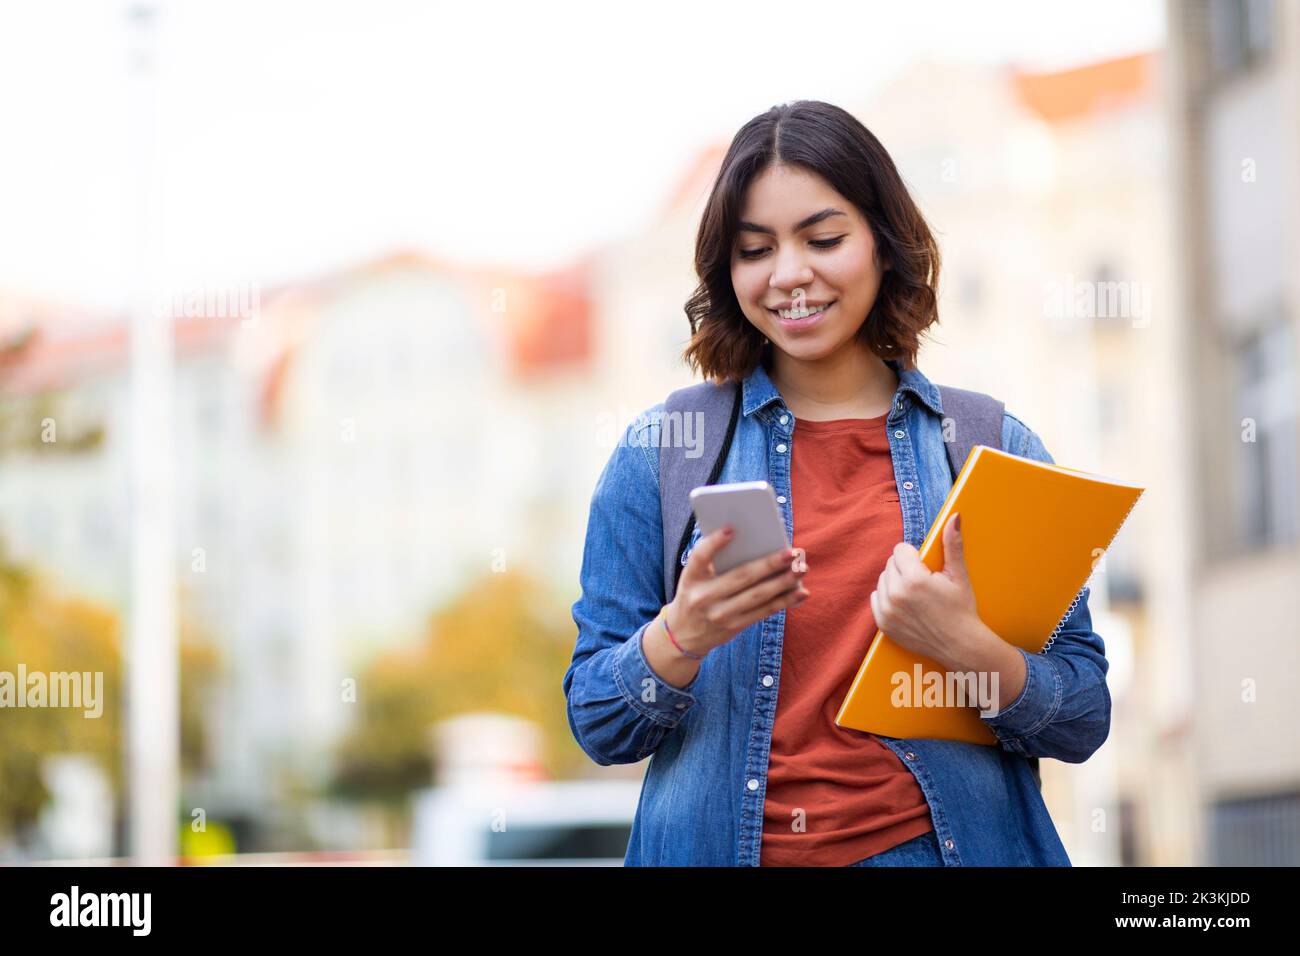 Middle Eastern Female Student Walking With Smartphone And Workbooks On City Street Stock Photo